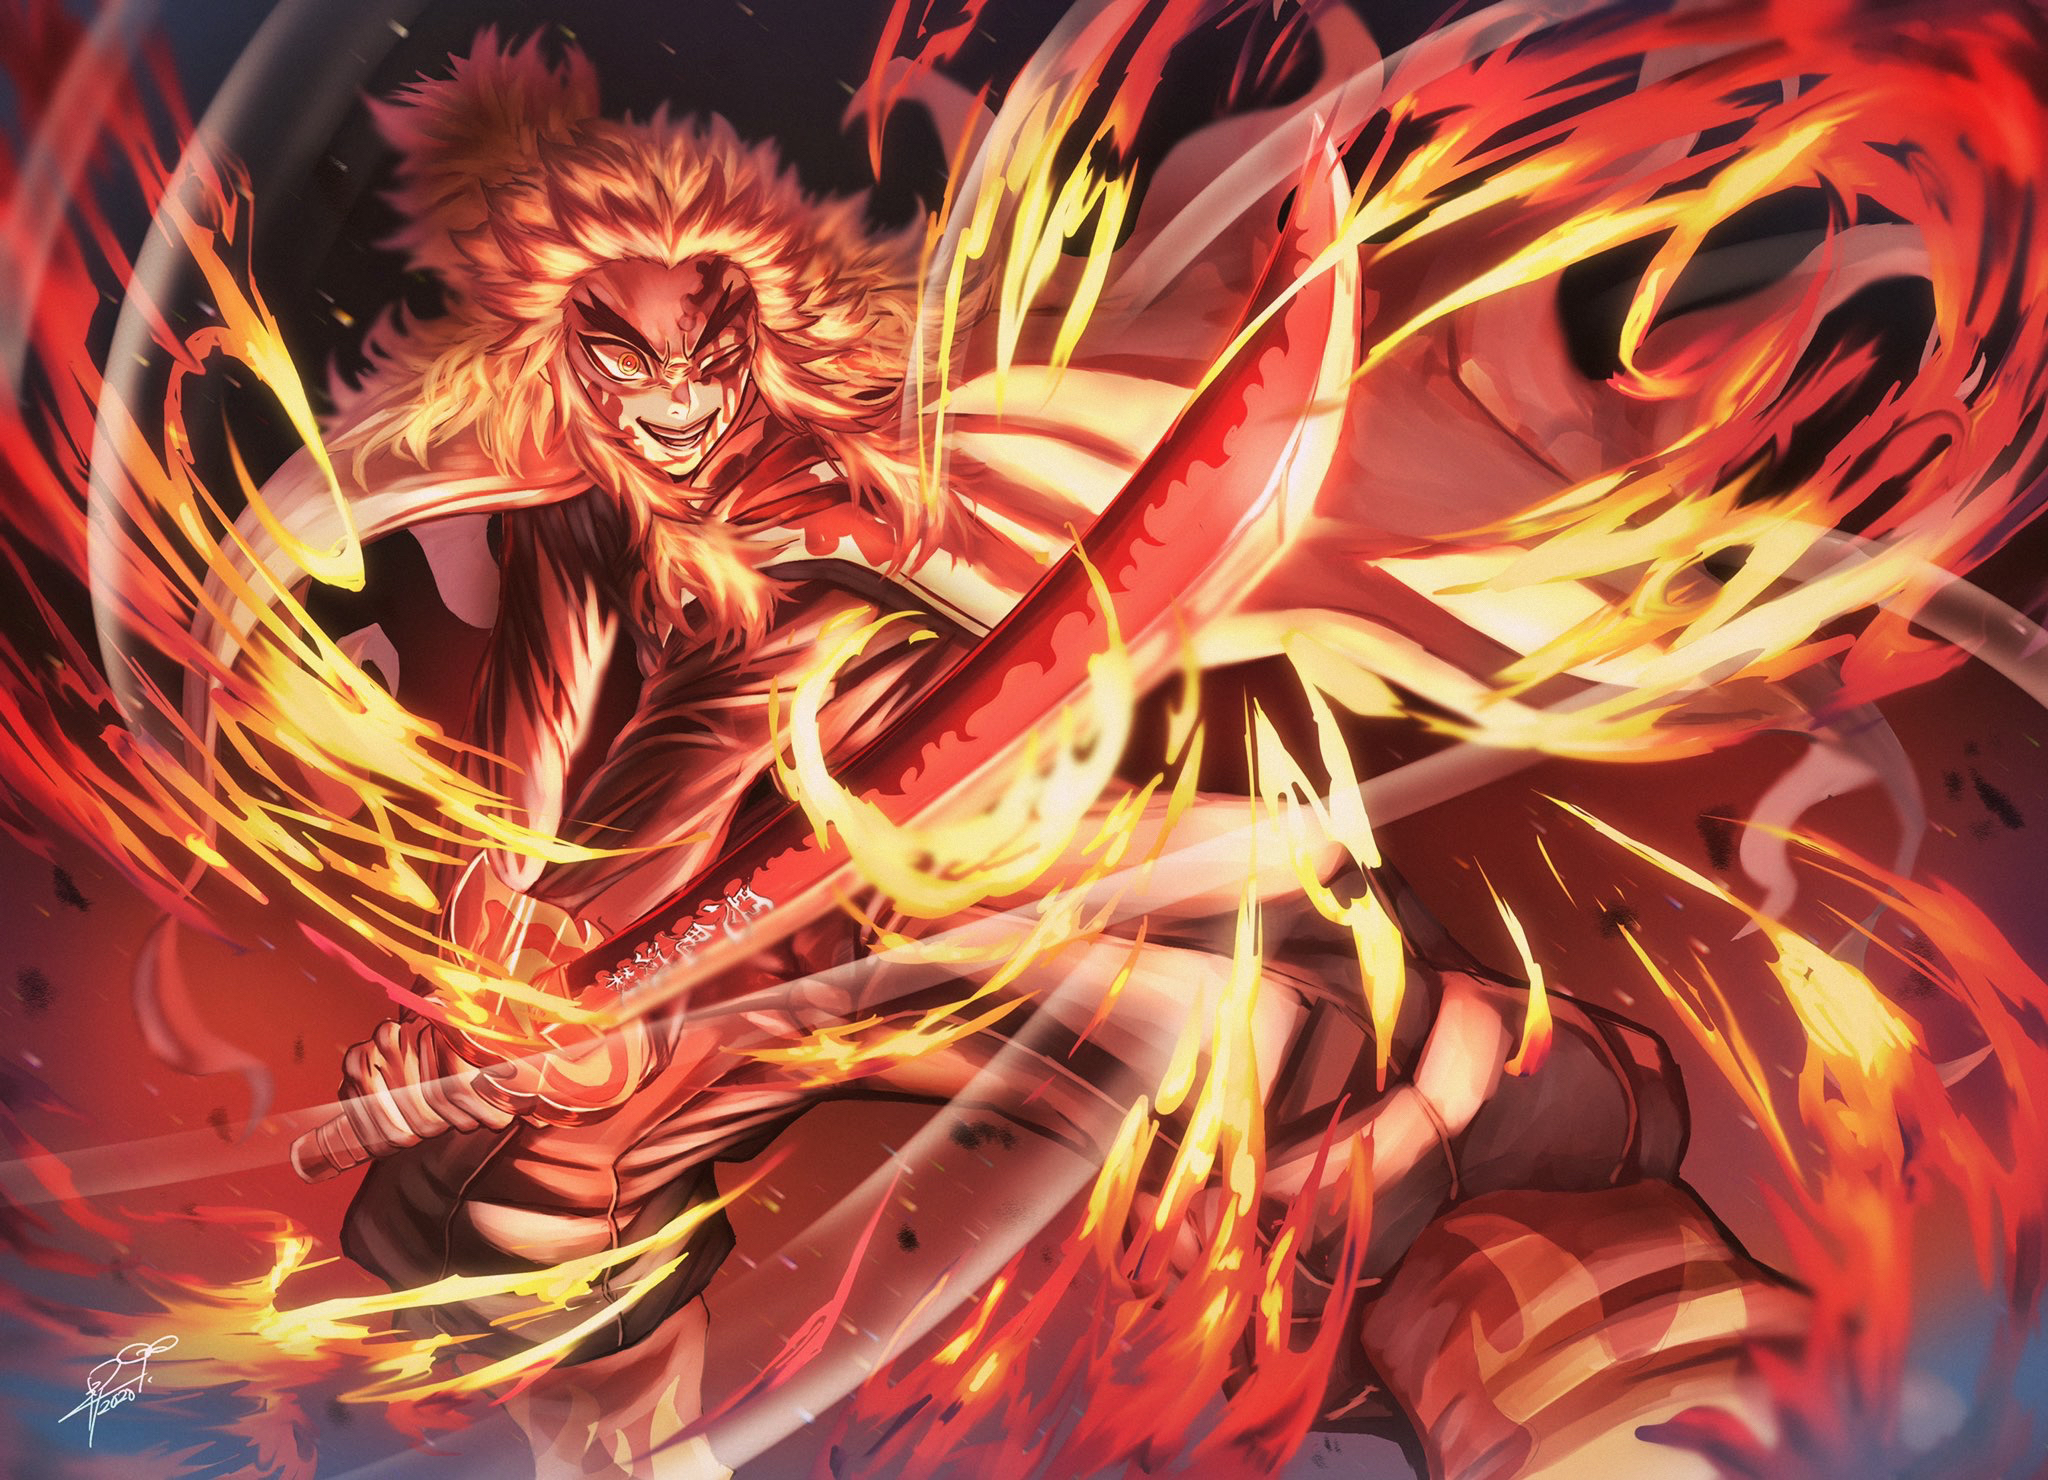 2932x Kyojuro Rengoku Dopest 2932x Resolution Wallpaper Hd Anime 4k Wallpapers Images Photos And Background Wallpapers Den